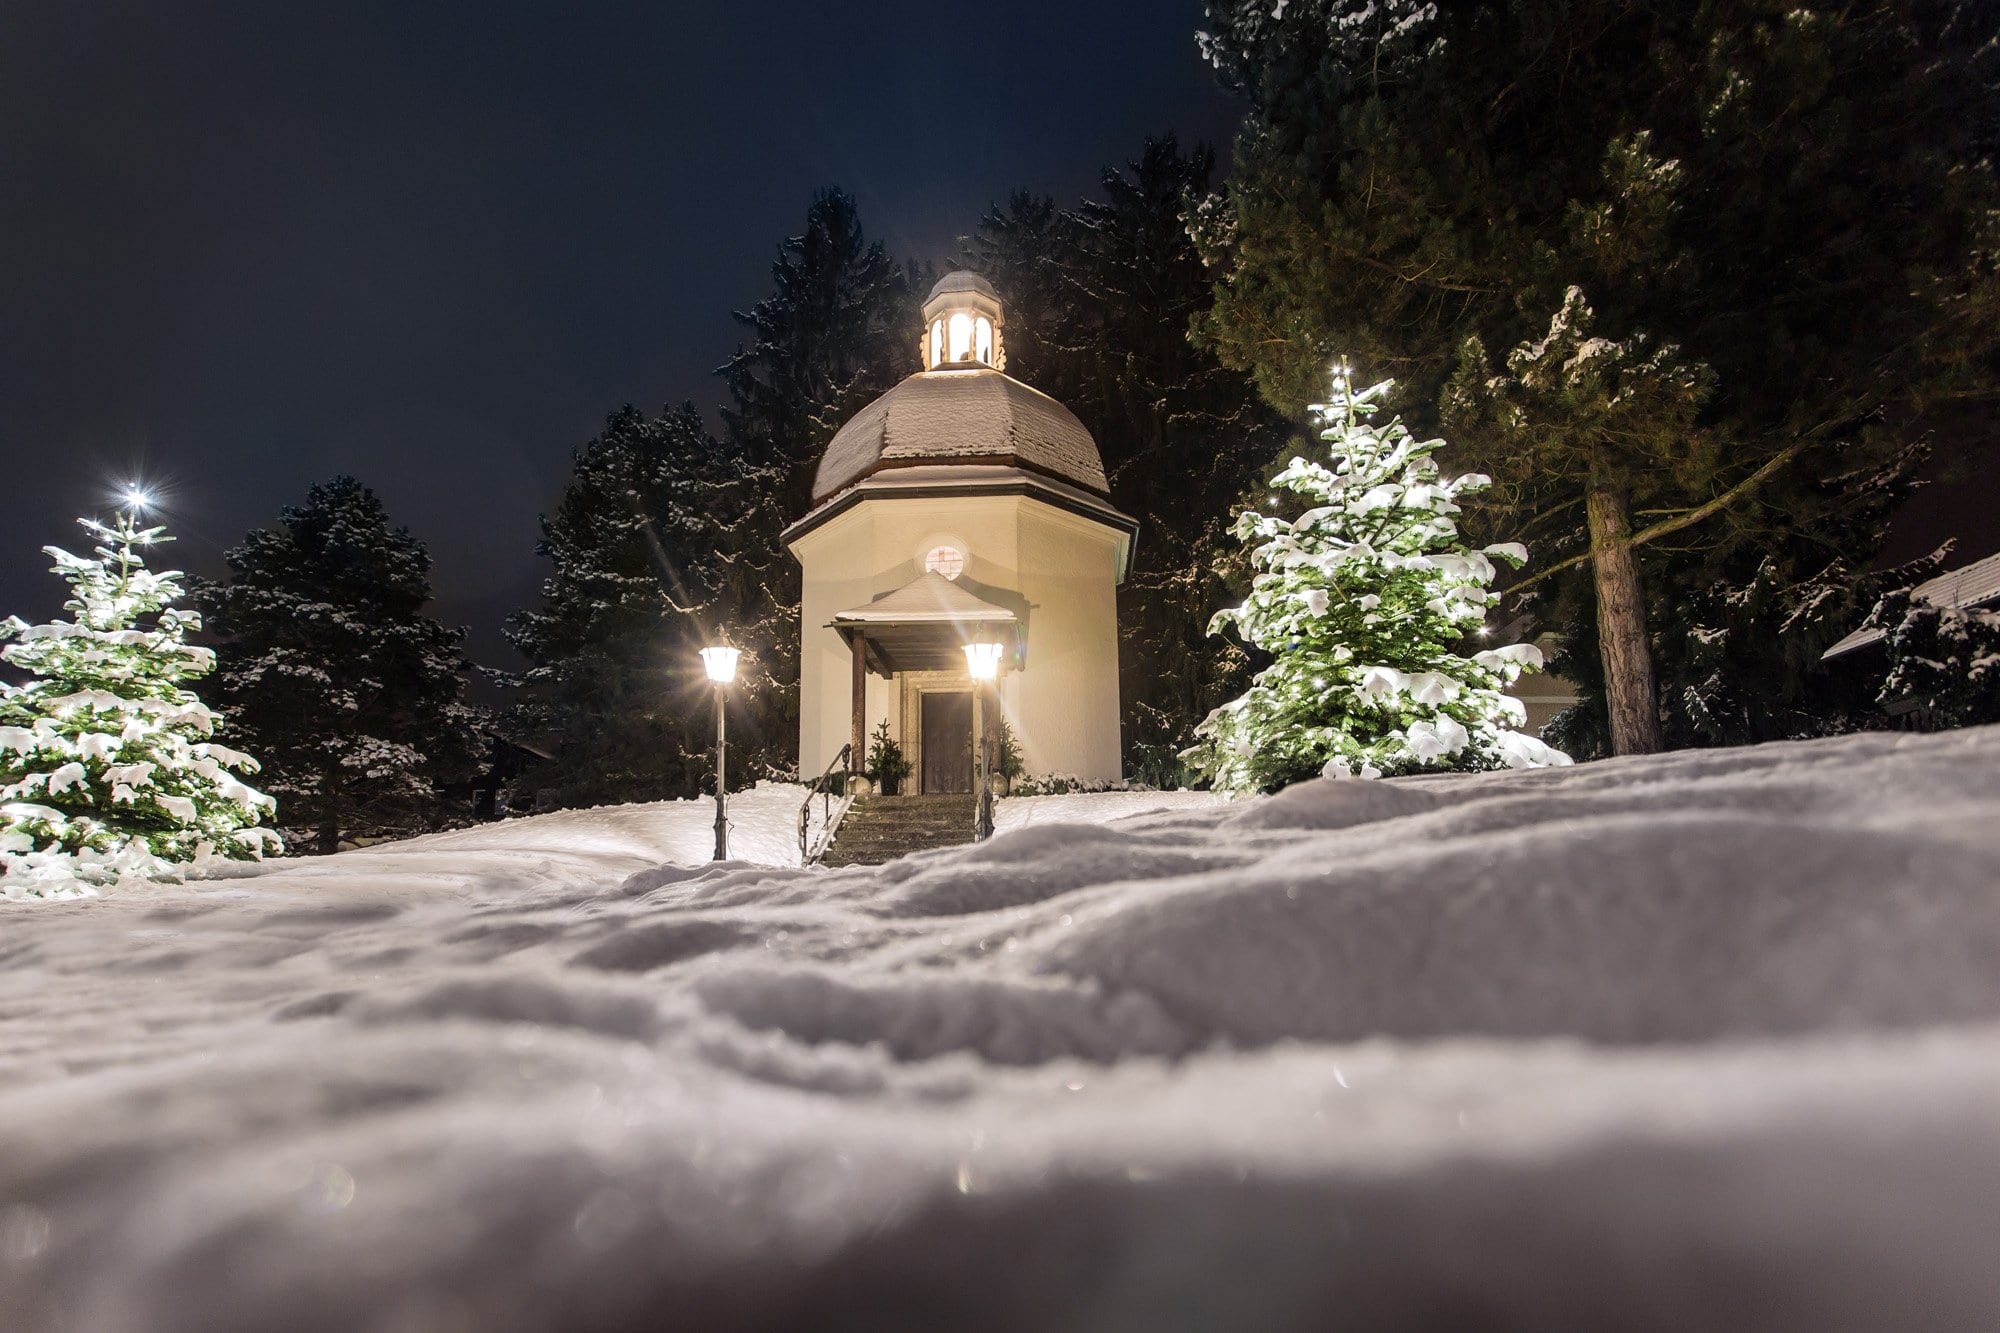 The Silent Night Chapel, which is in the town of Oberndorf in the Austrian state of Salzburg, is a monument to the Christmas carol "Silent Night." The chapel stands on the site of the former St. Nikola Church, where on Christmas Eve in 1818 the carol was performed for the first time. (CNS photo/courtesy www.stillenacht.com)